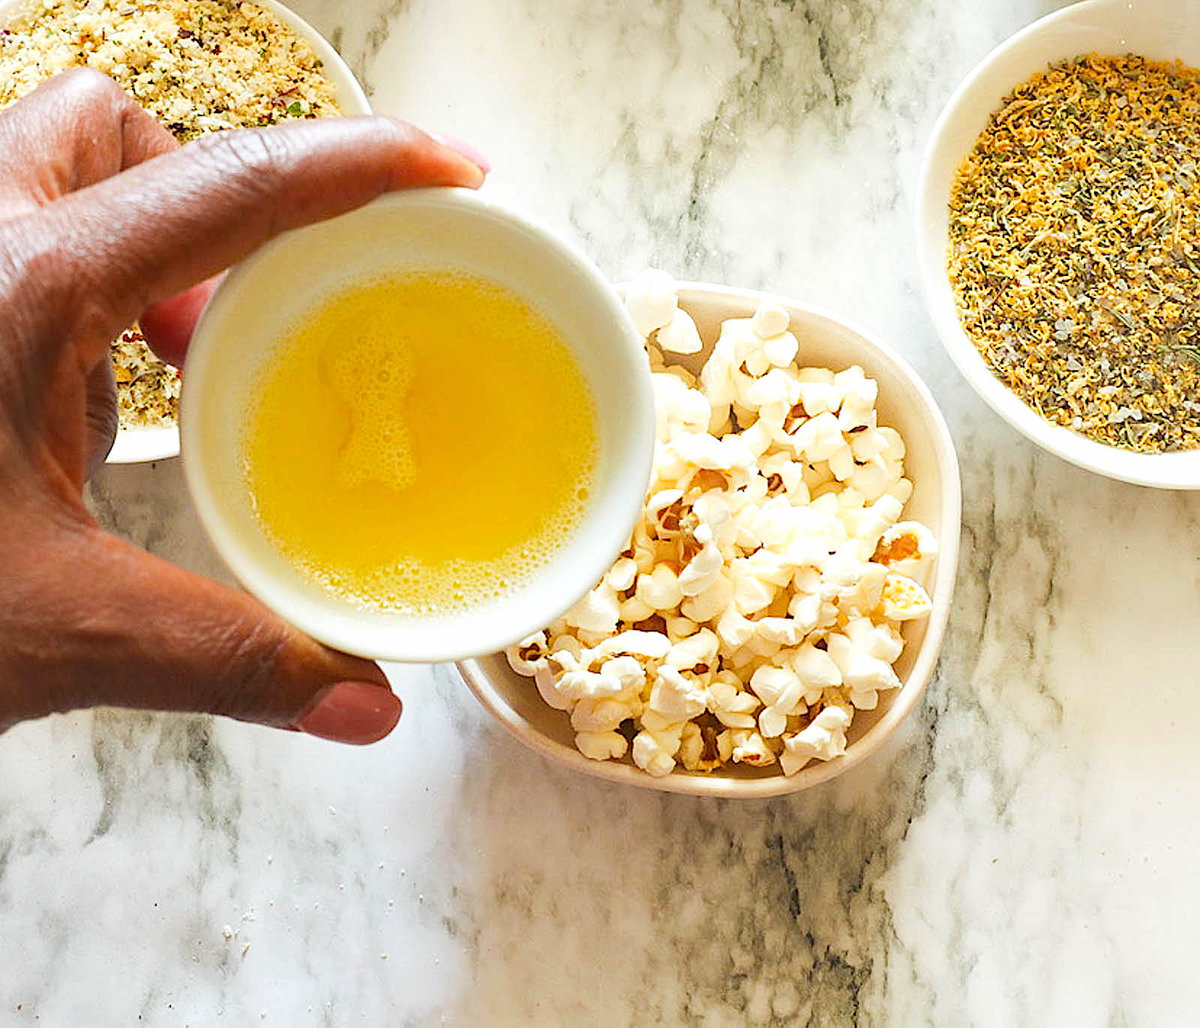 Pour melted butter over seasoned popcorn